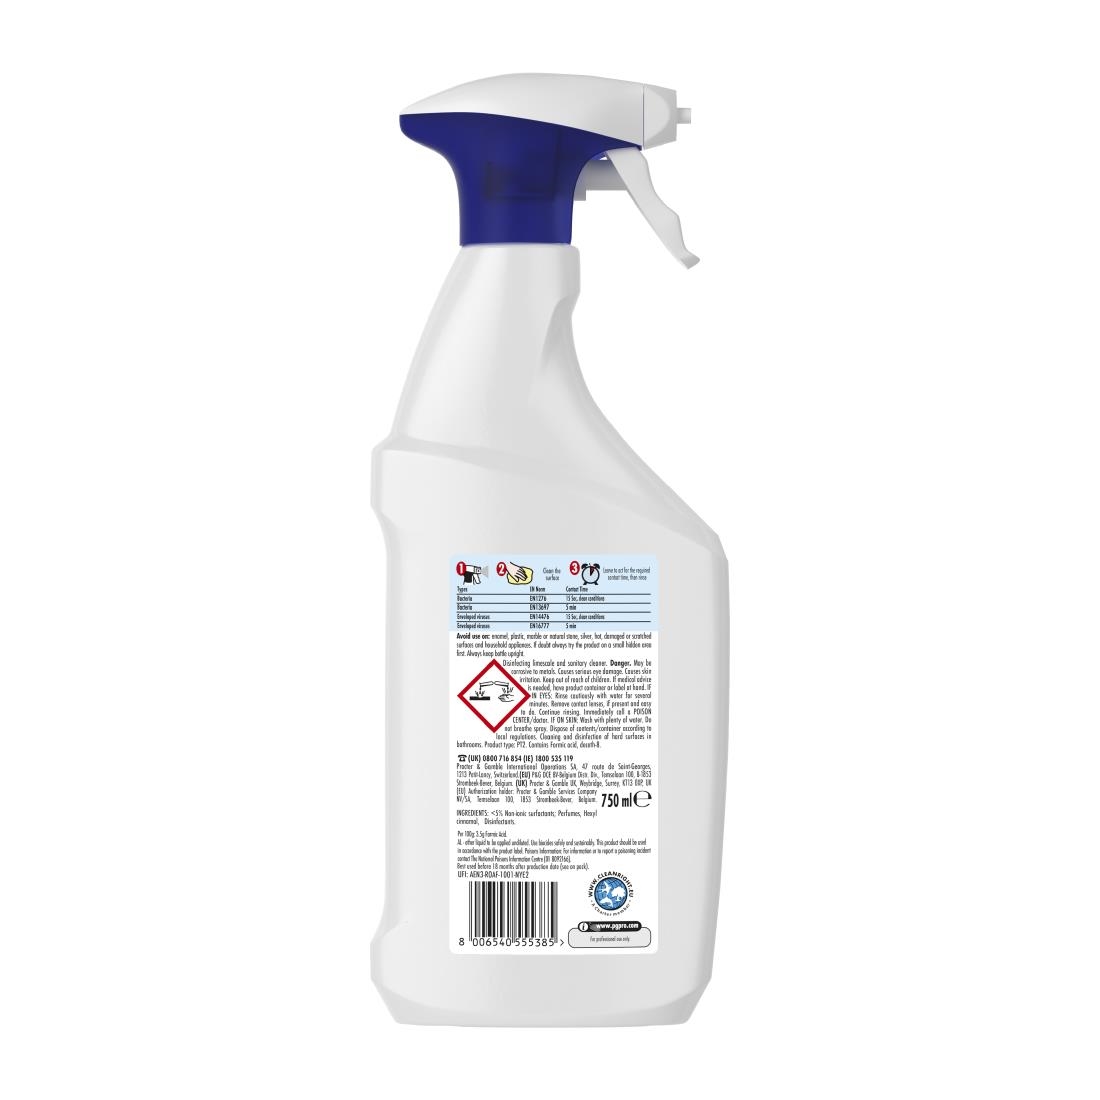 Viakal Professional Limescale Remover Spray 750ml Pack of 10 (DX570)